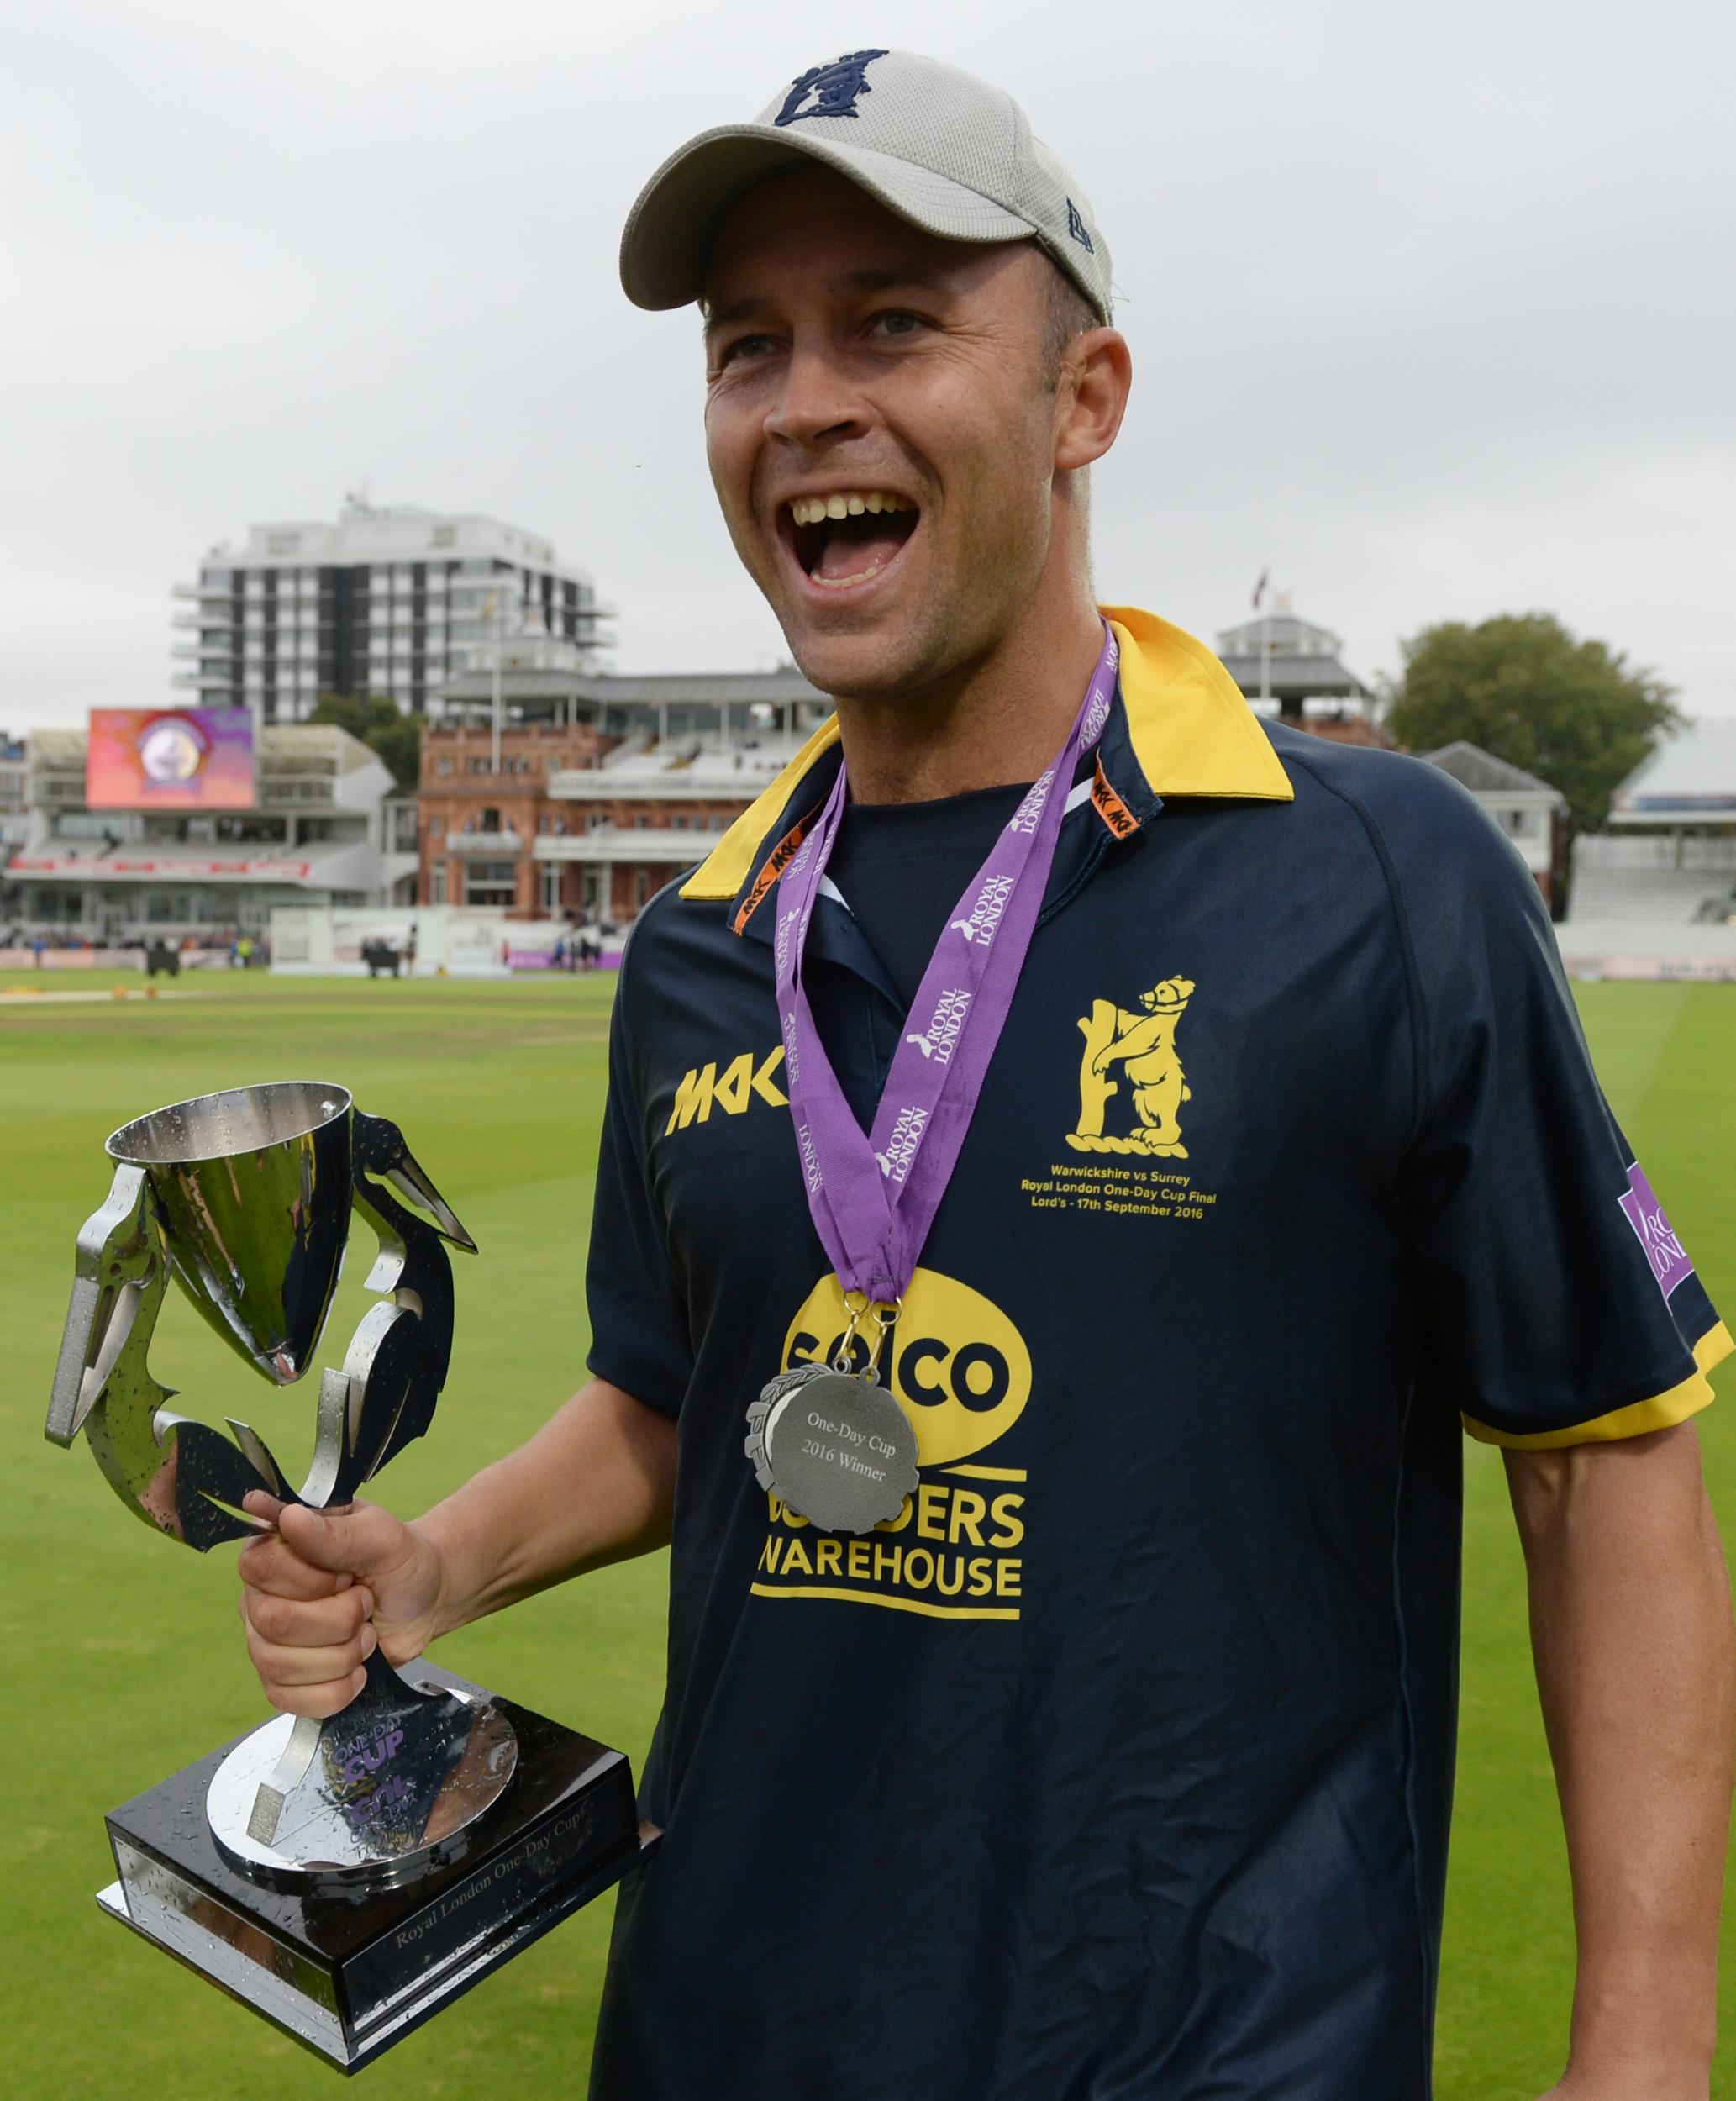 Trott's post-England career was more serene but also successful, winning the Royal London Cup